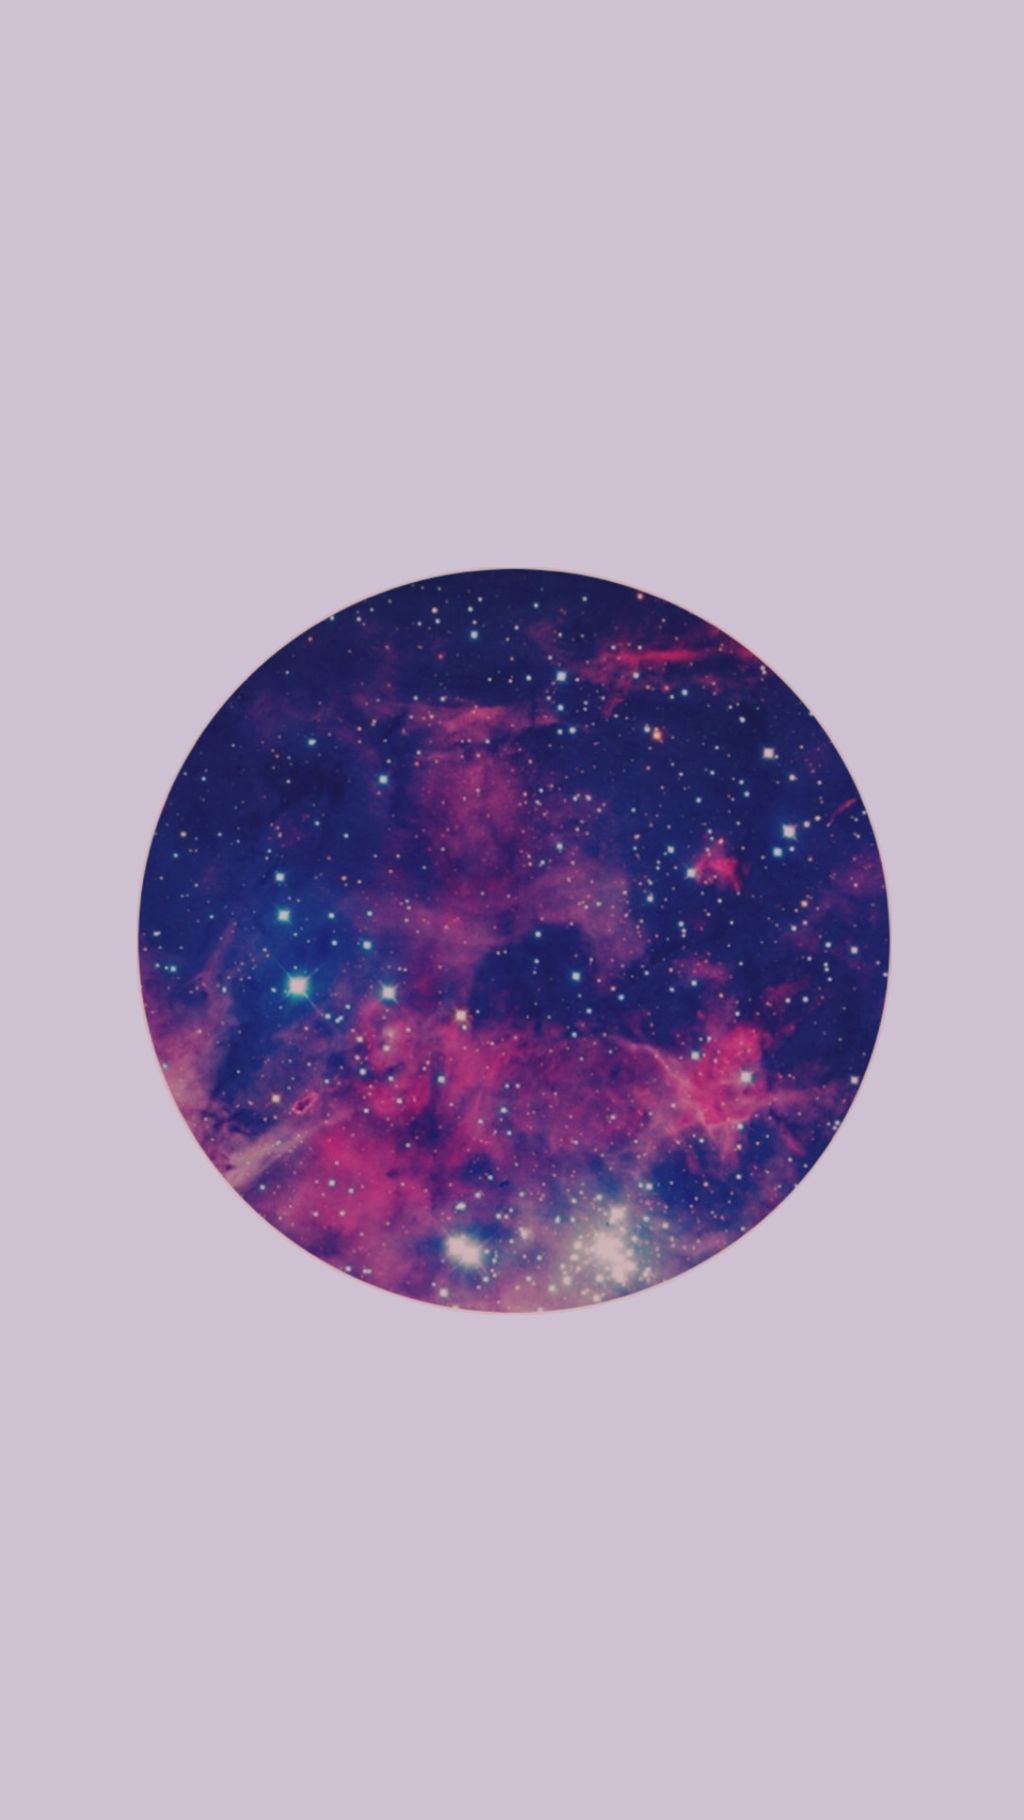 Free download wallpaper galaxy aesthetic freetouse galaxywallpaper